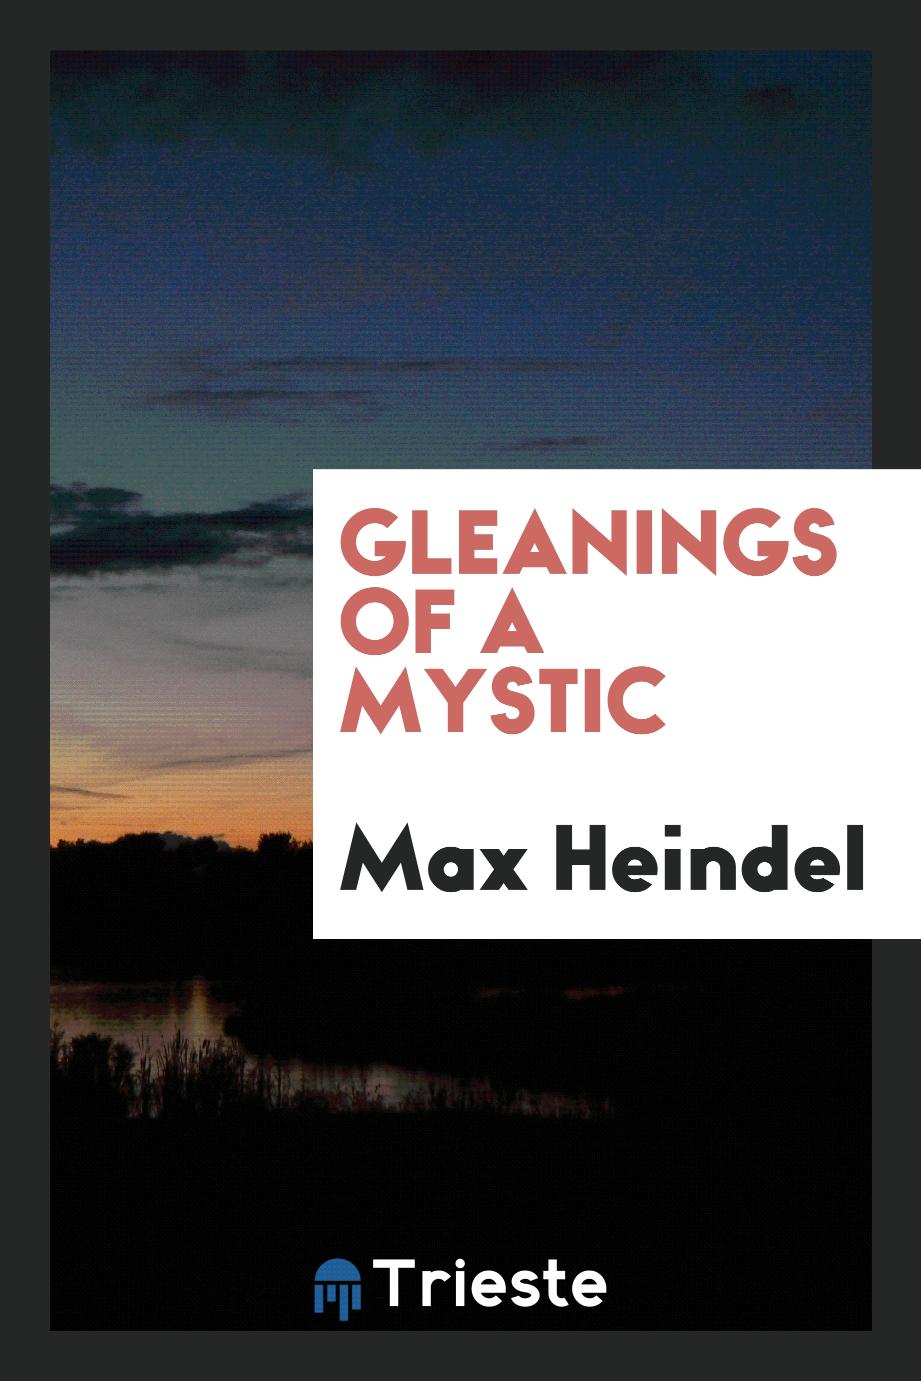 Gleanings of a mystic